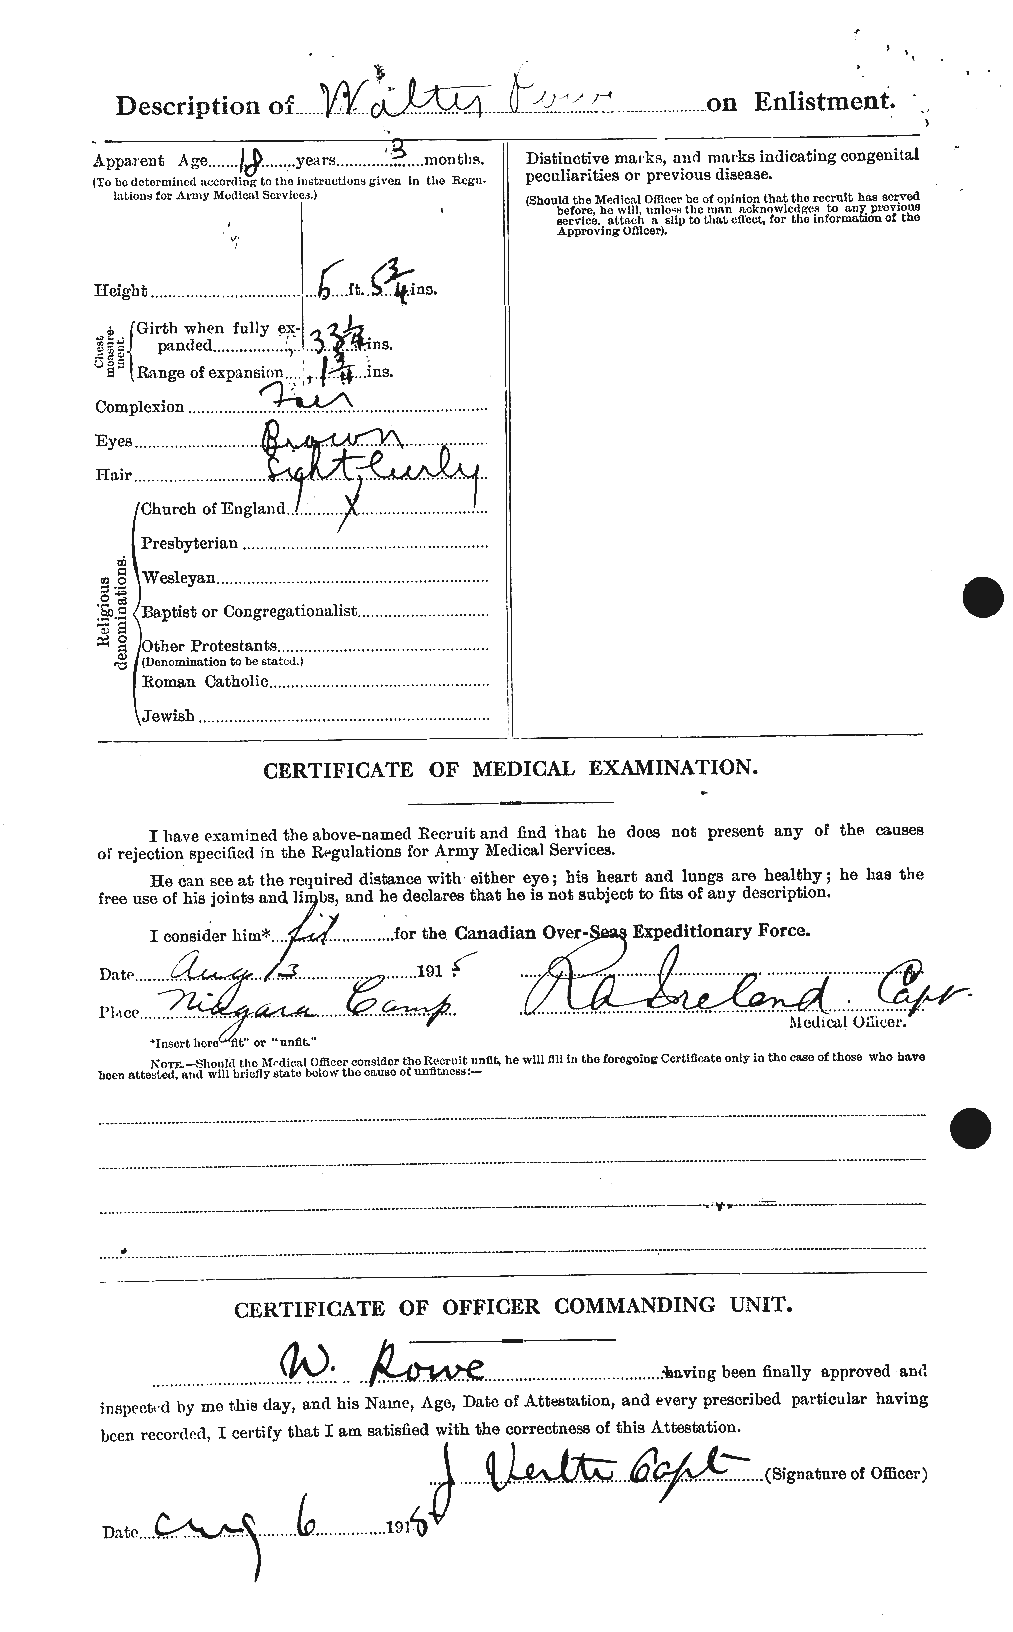 Personnel Records of the First World War - CEF 616010b